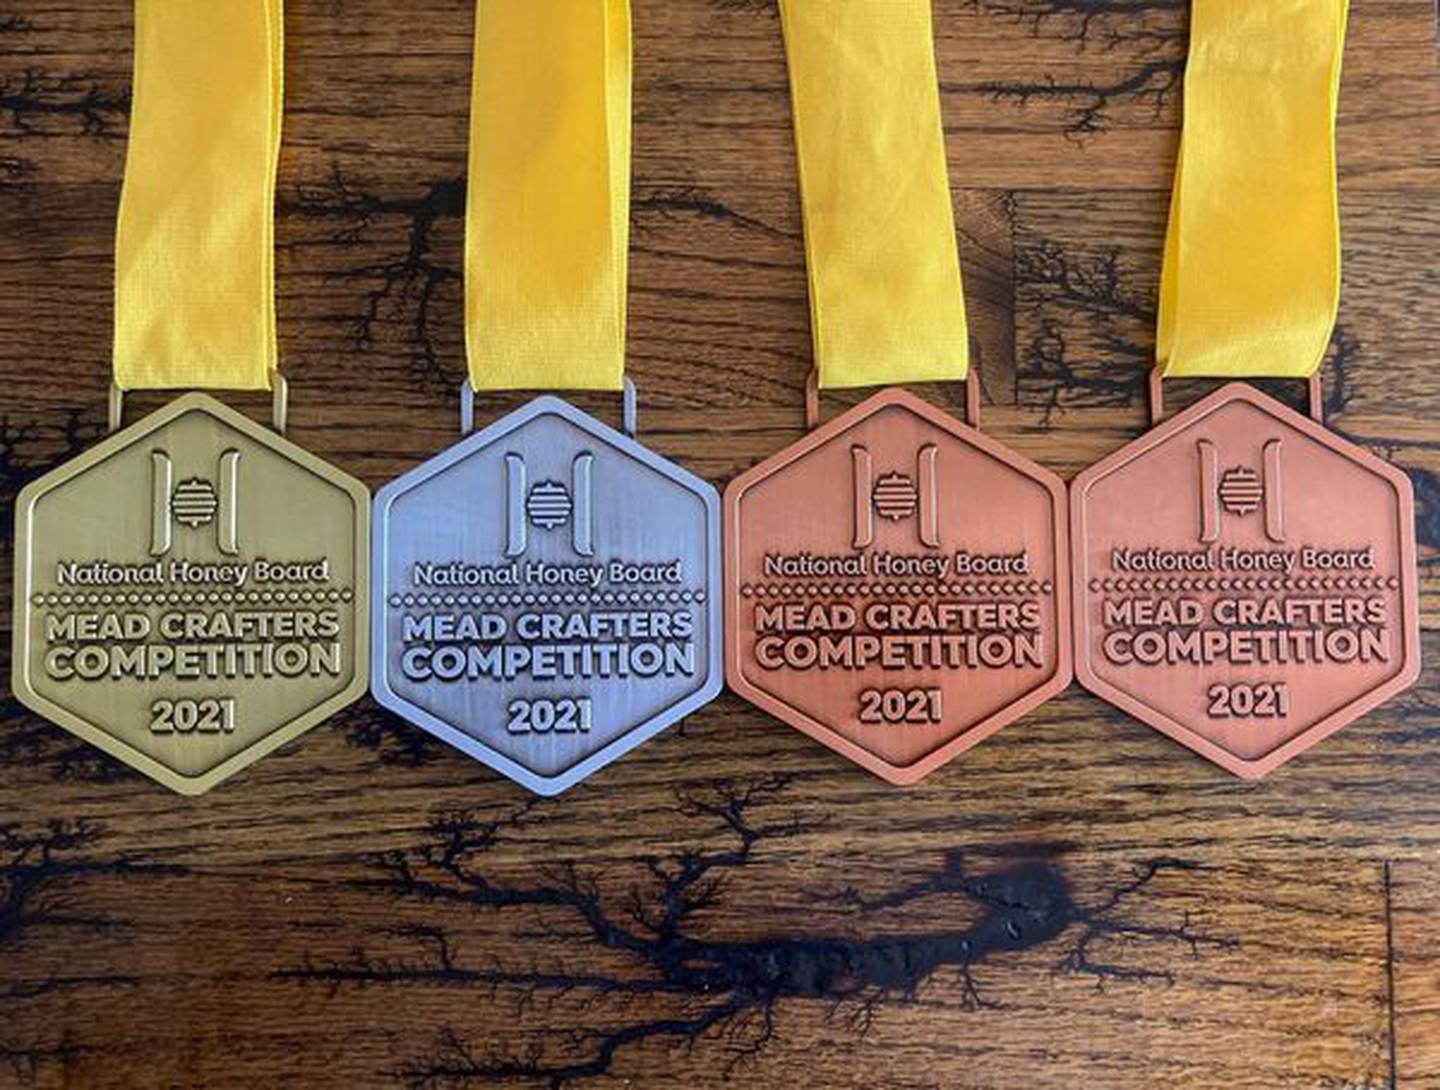 Mead crafters competition medals